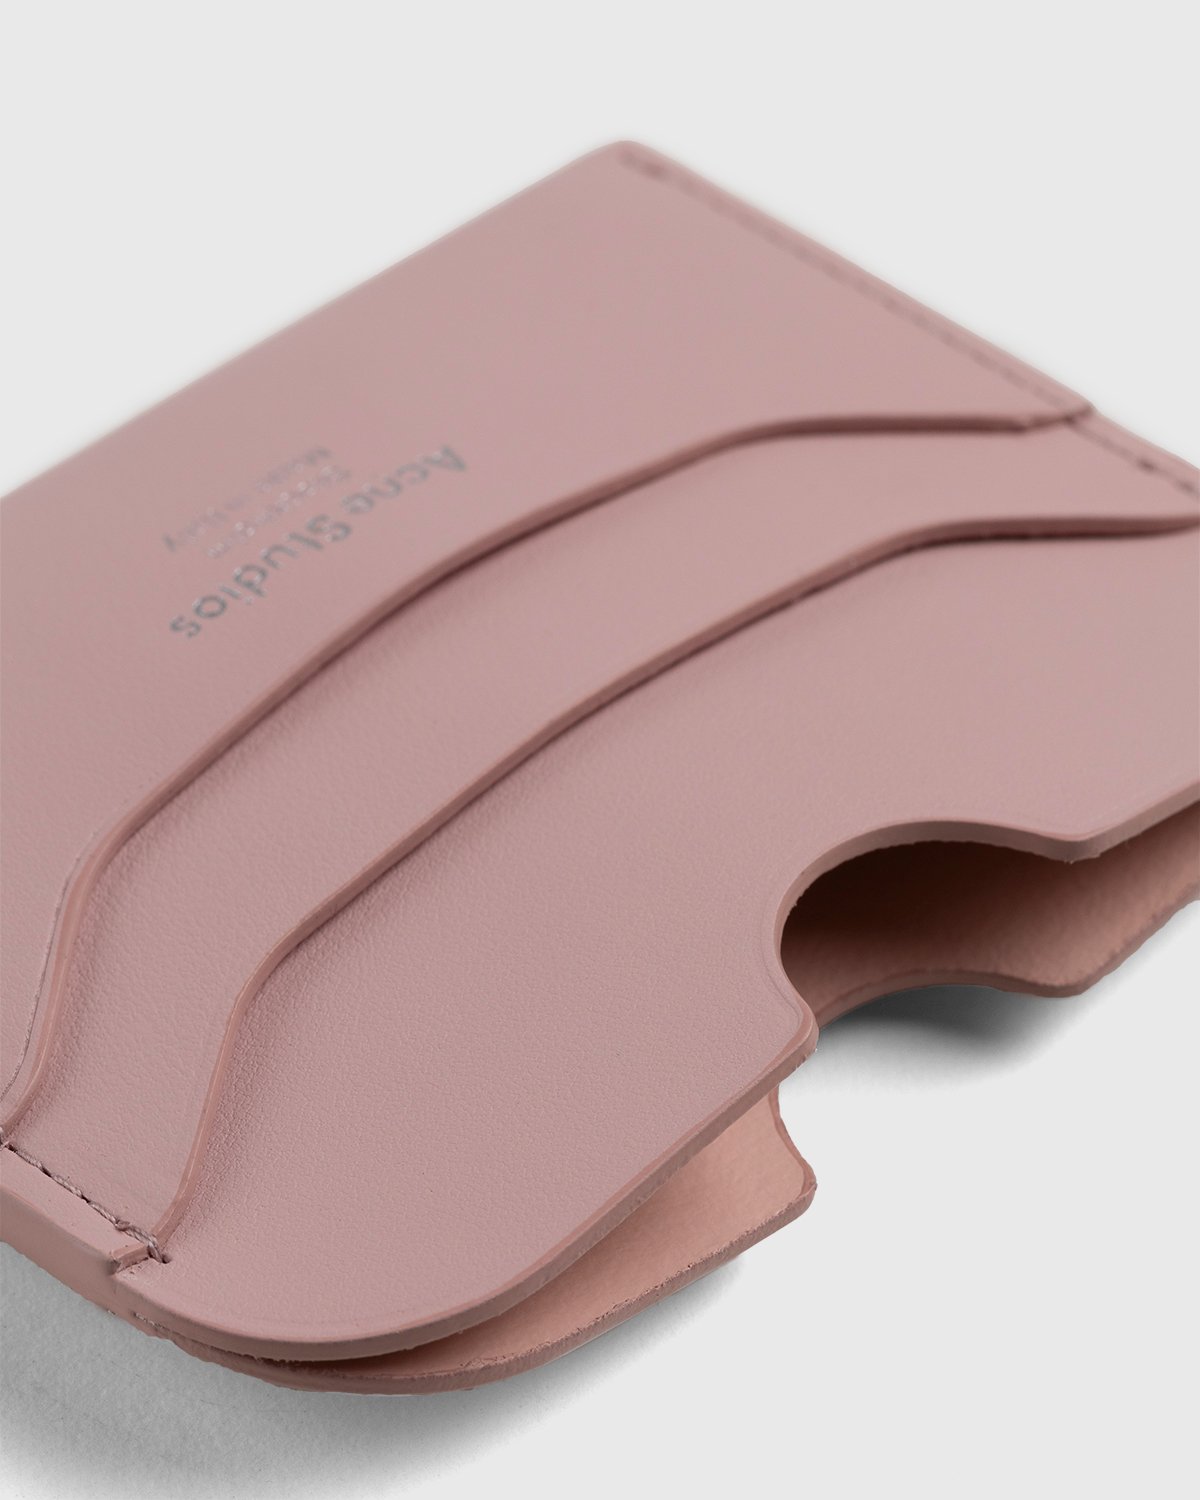 Acne Studios - Leather Card Case Powder Pink - Accessories - Pink - Image 4